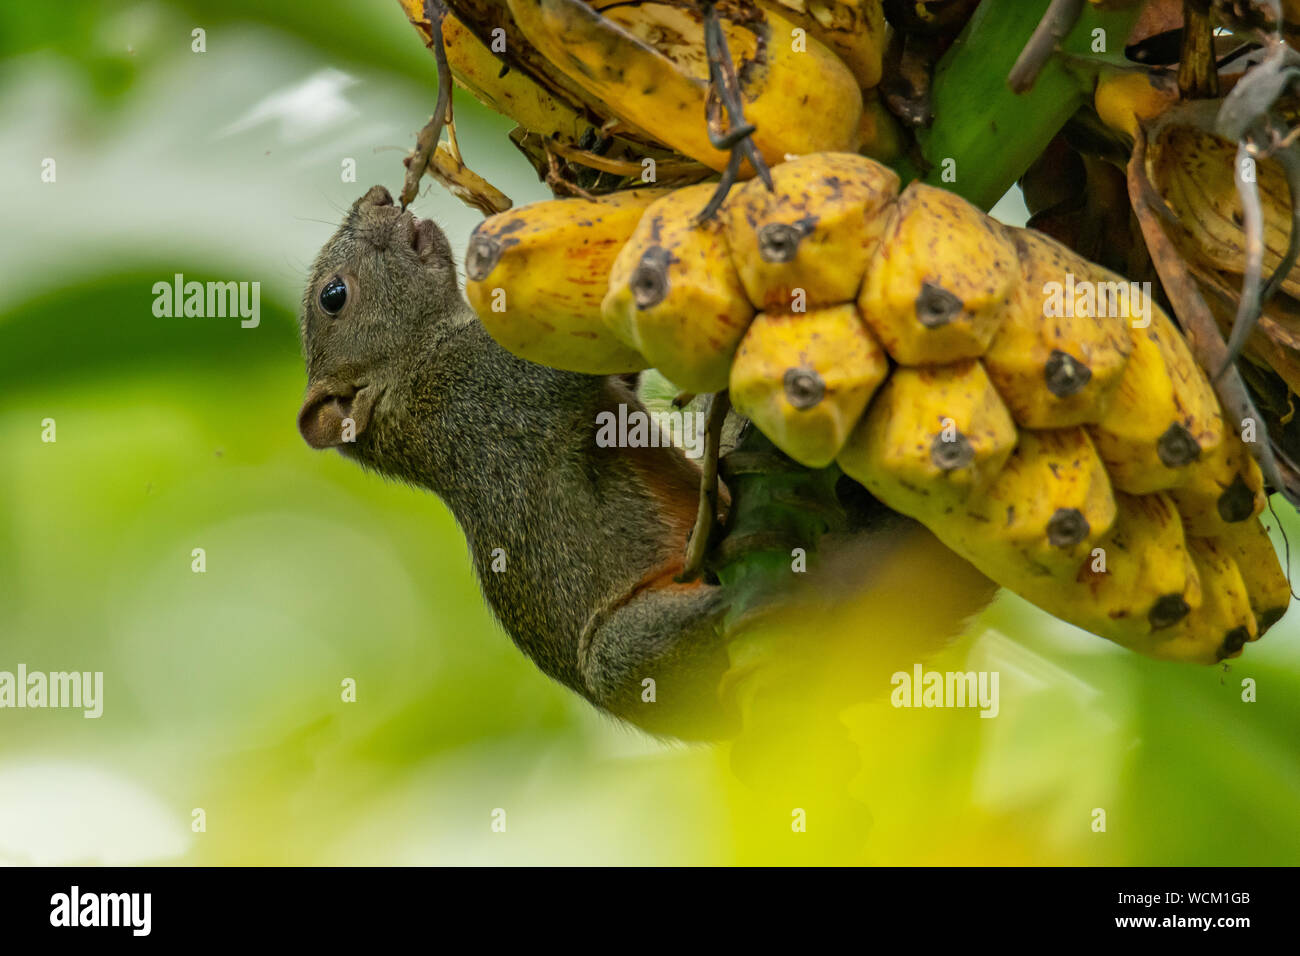 Beautiful squirrel perching on bunch of fully ripe banana and feeding on it. Stock Photo